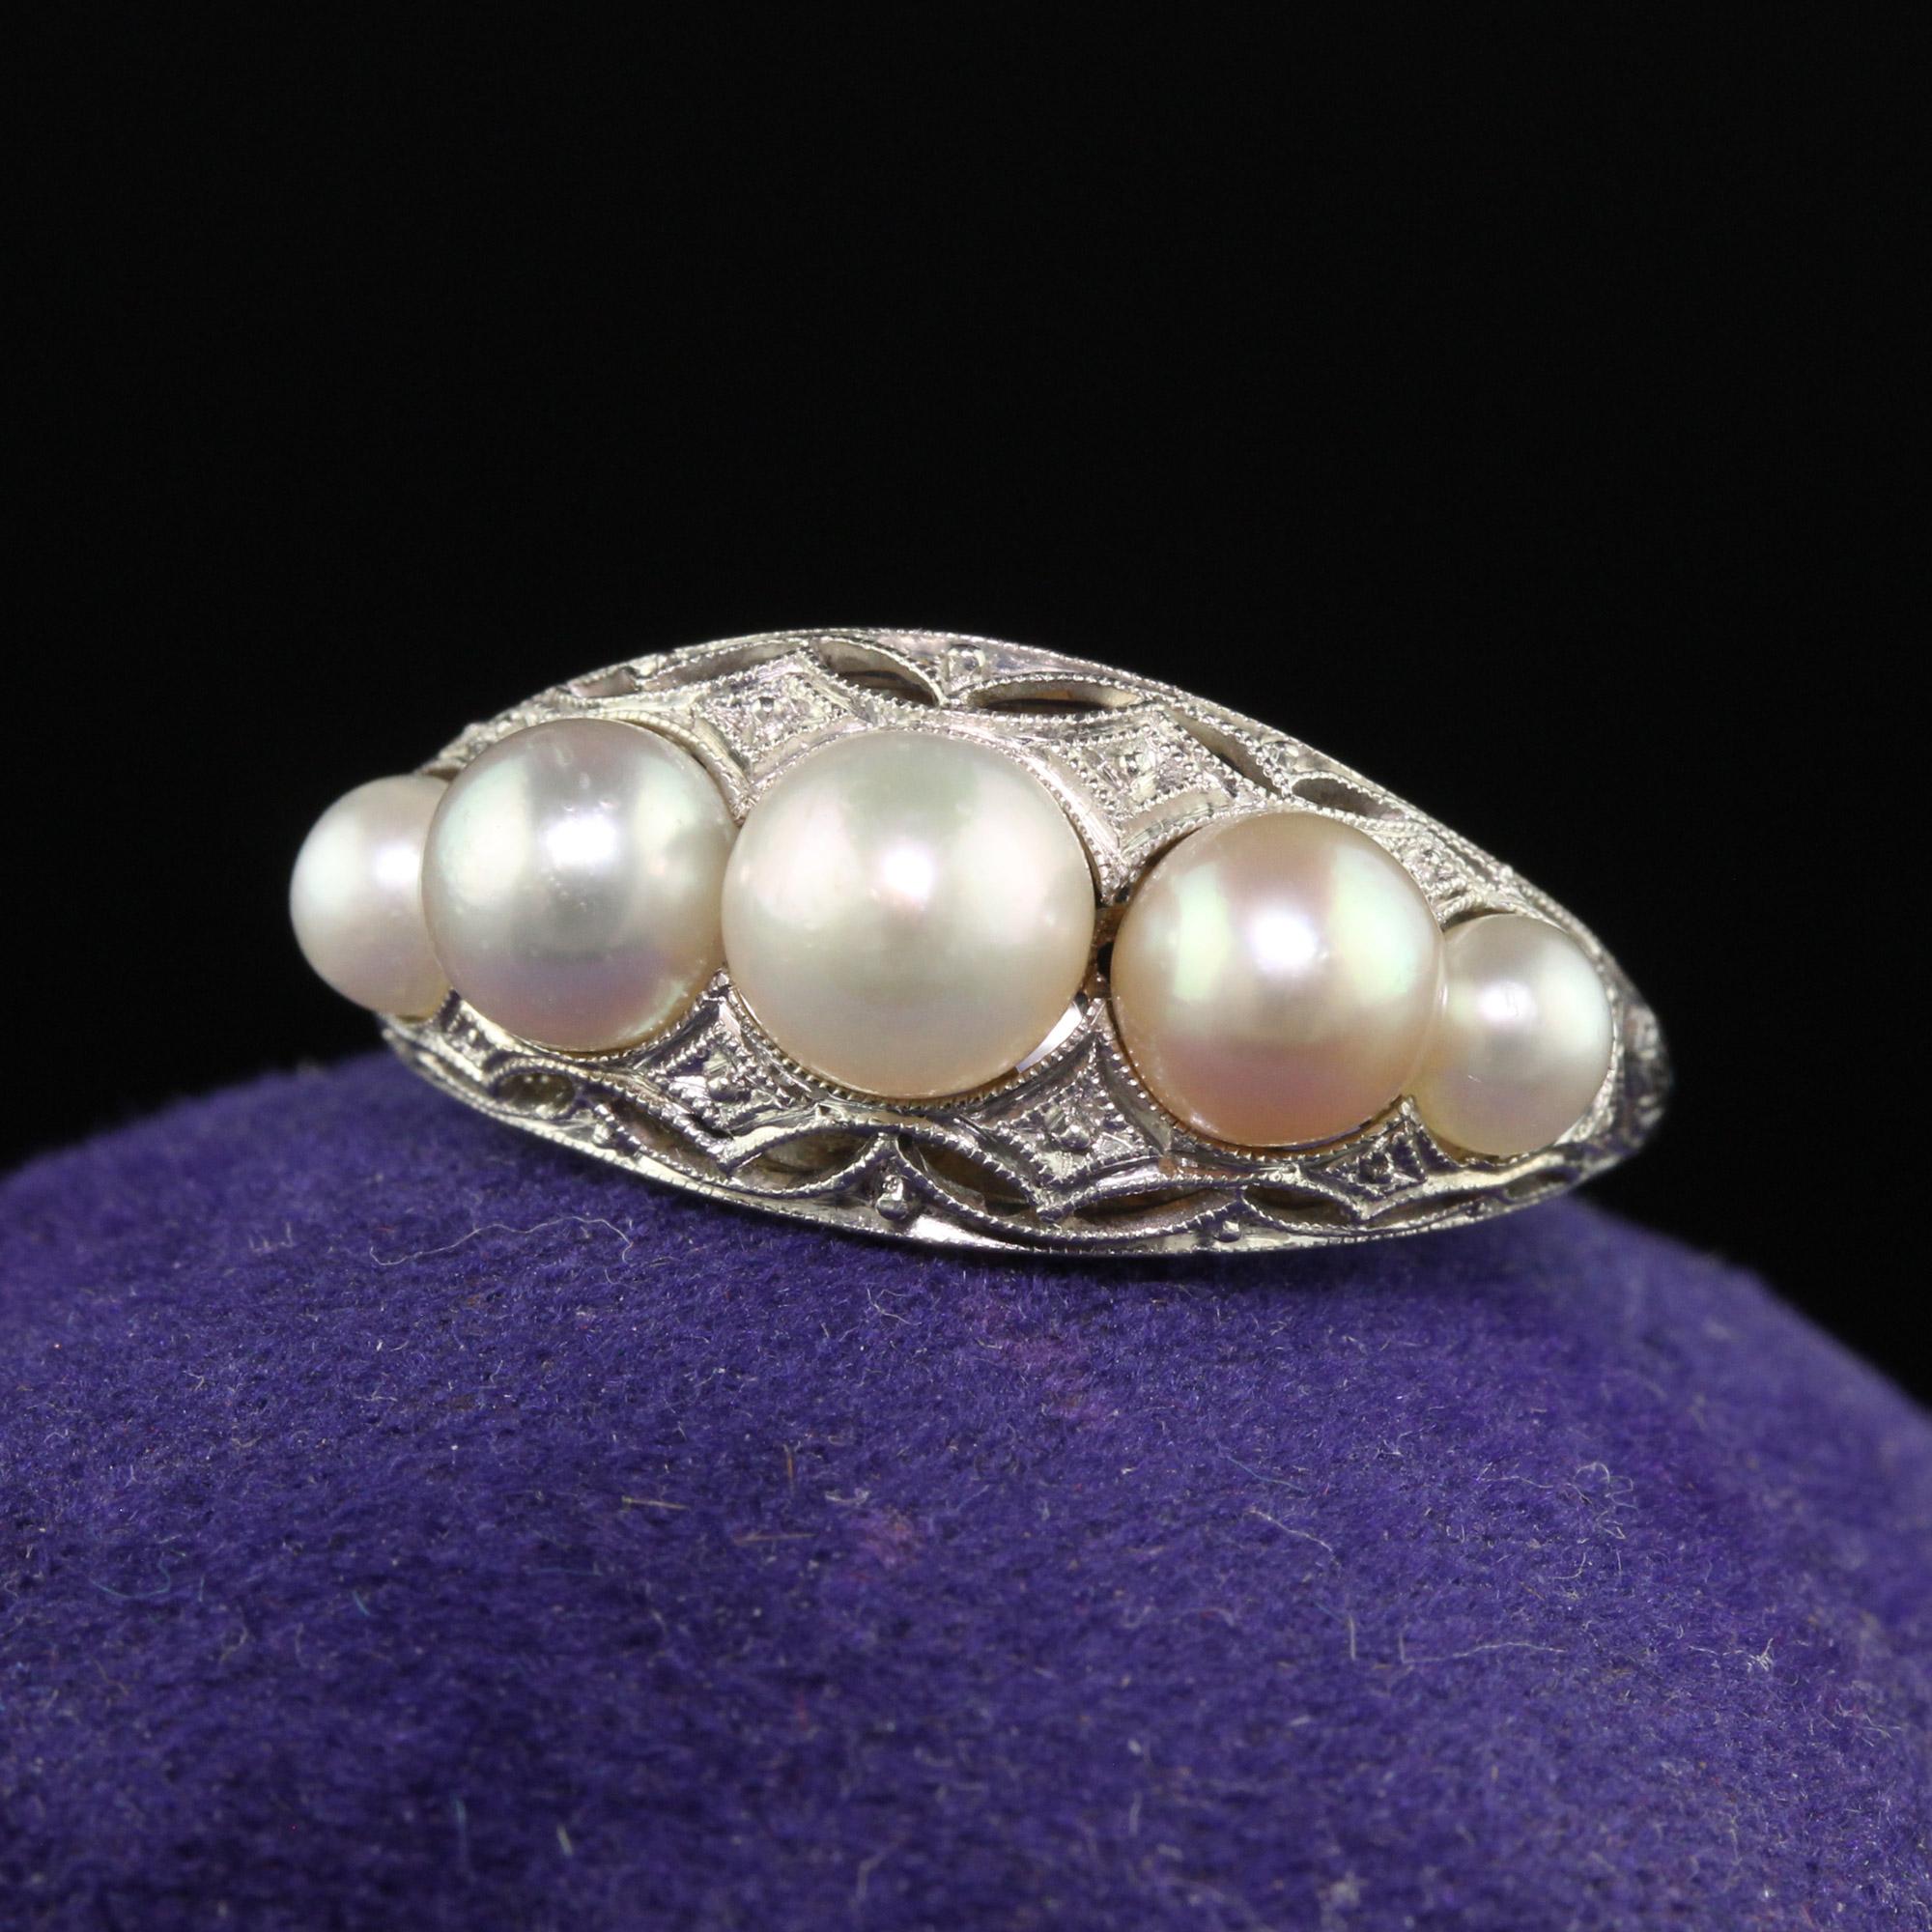 Beautiful Antique Art Deco Platinum Natural Pearl Five Stone Filigree Ring. This beautiful natural pearl ring is crafted in platinum. The top of the ring has five graduated pearls on it and they are set in a beautiful Art Deco filigree mounting that